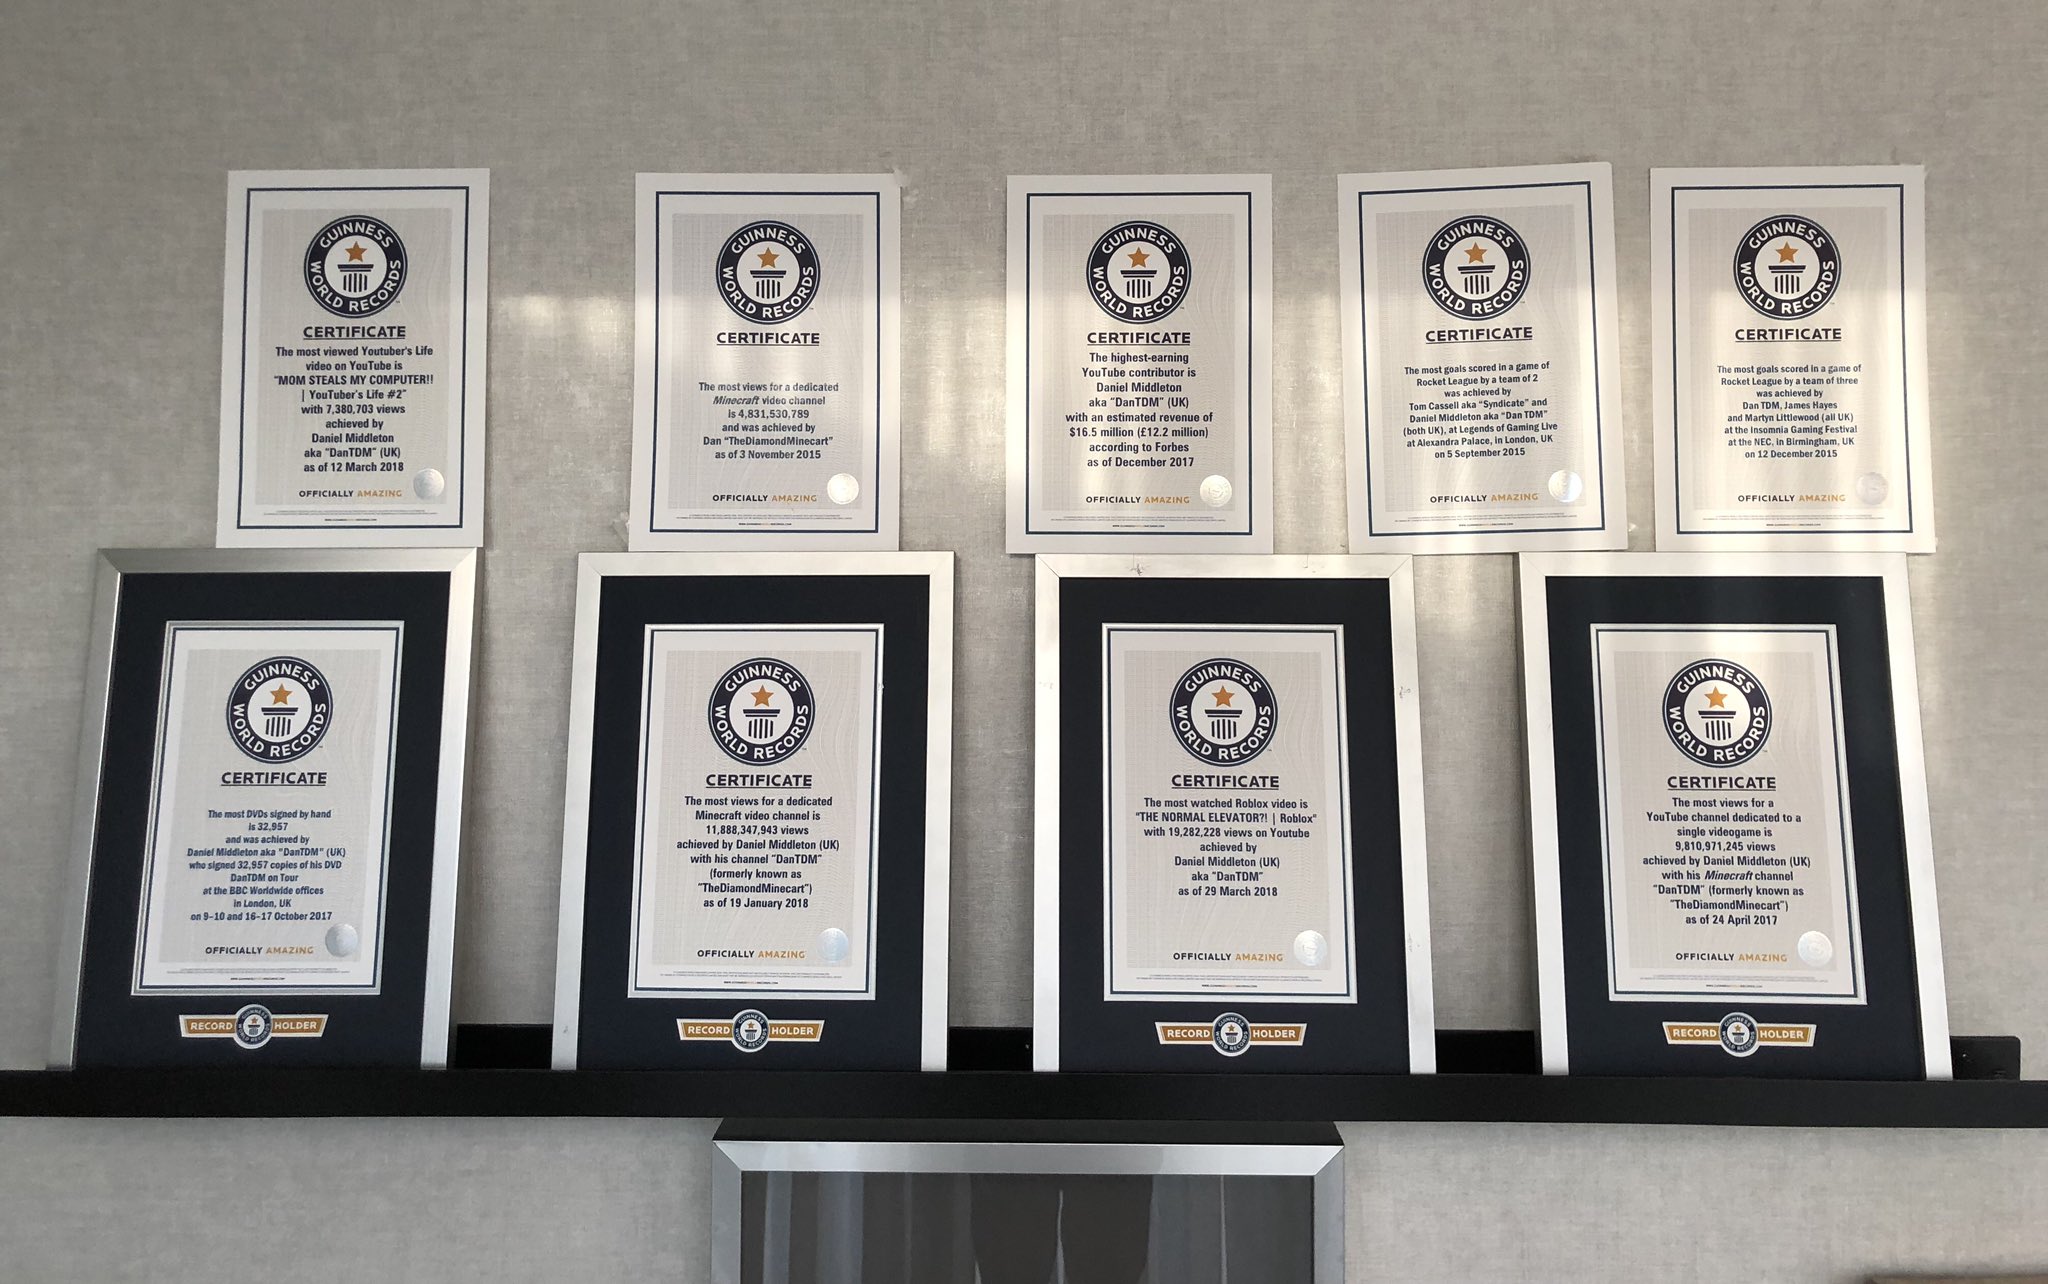 ᴅᴀɴᴛᴅᴍ On Twitter Here Comes A Weird Flex But Okay Got Delivery Of 5 New Guinness World Records Today I Now Have 9 That S Insane Https T Co Uogehmvtl7 - roblox accounts dantdm.com